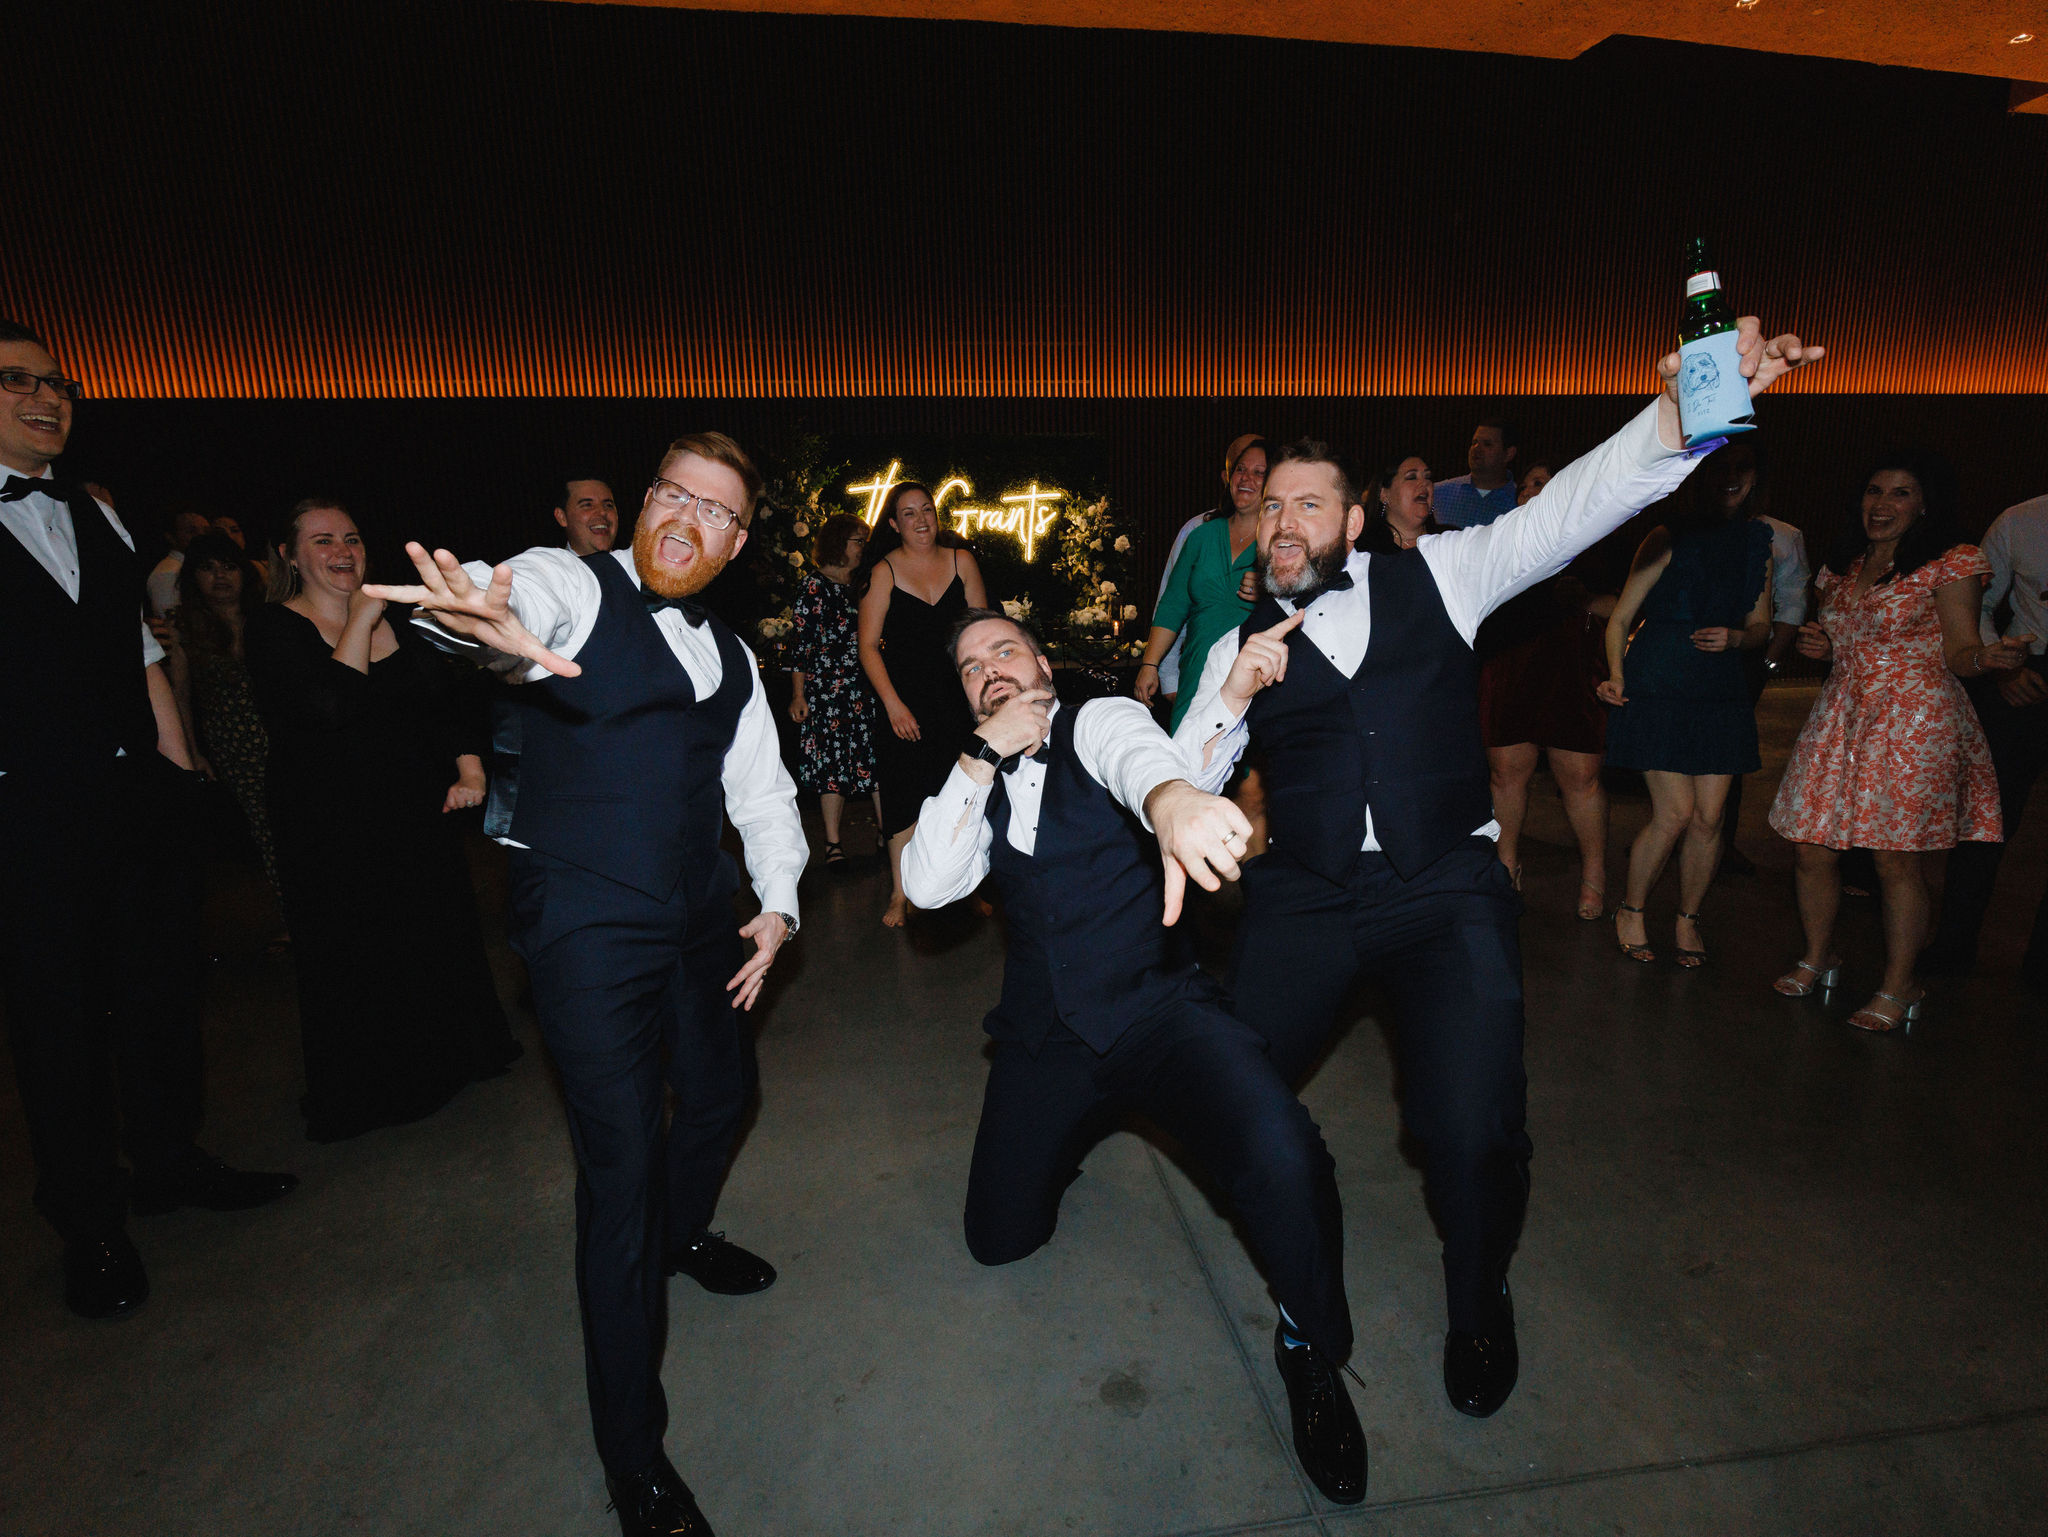 Bobby and his groomsmen partying at his wedding